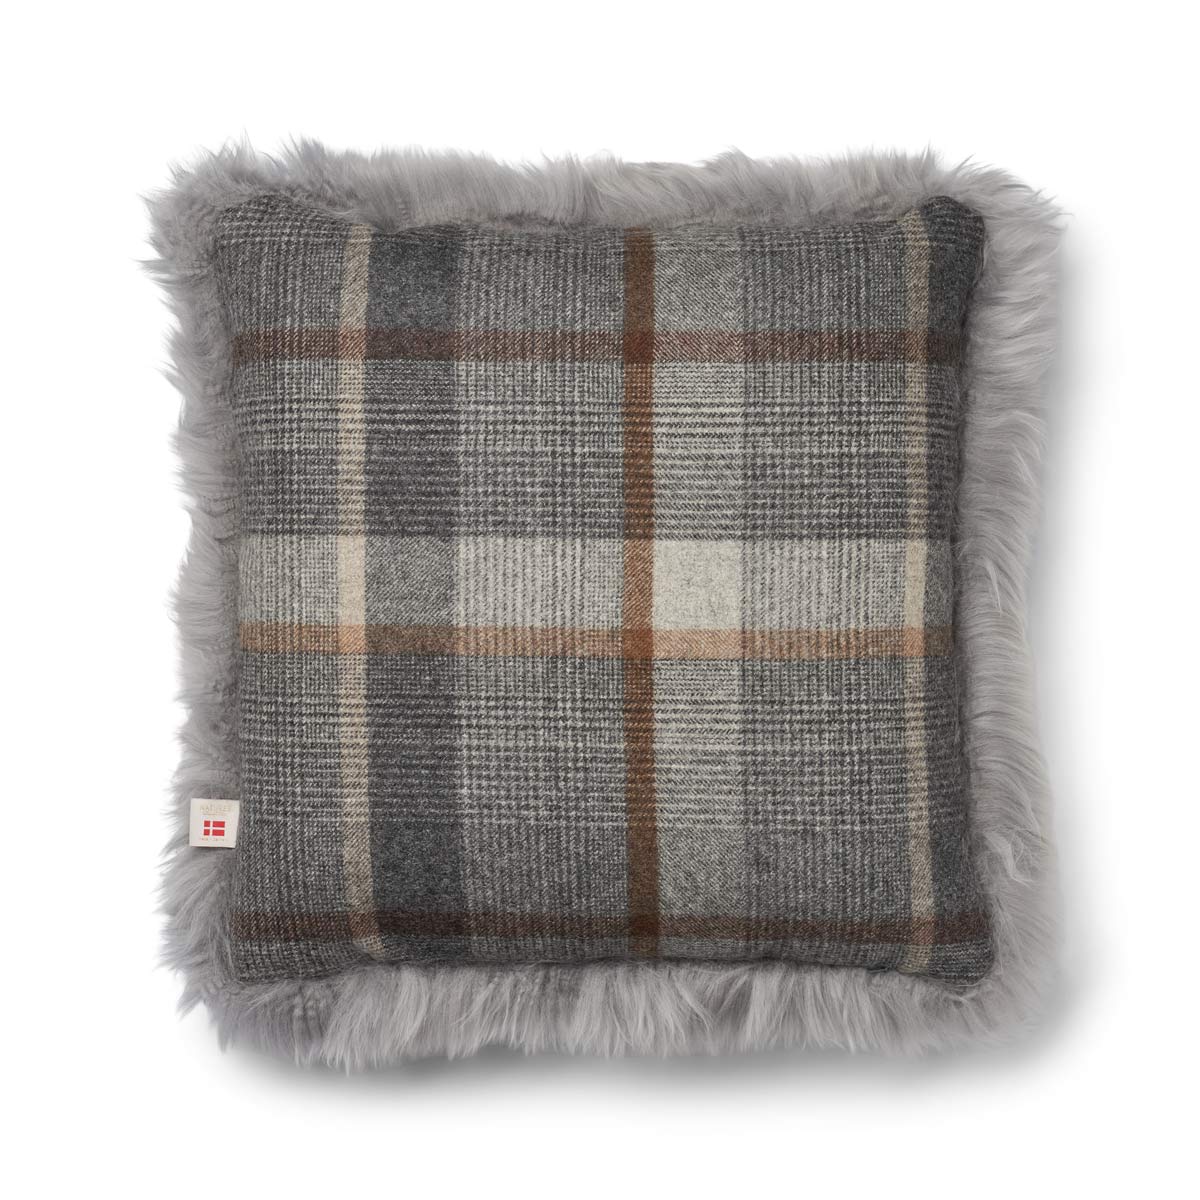 Checked Collection, Cushion One Side 100 % Wool, One Side LW New Zealand Sheepskin. Size: 52x52 cm.